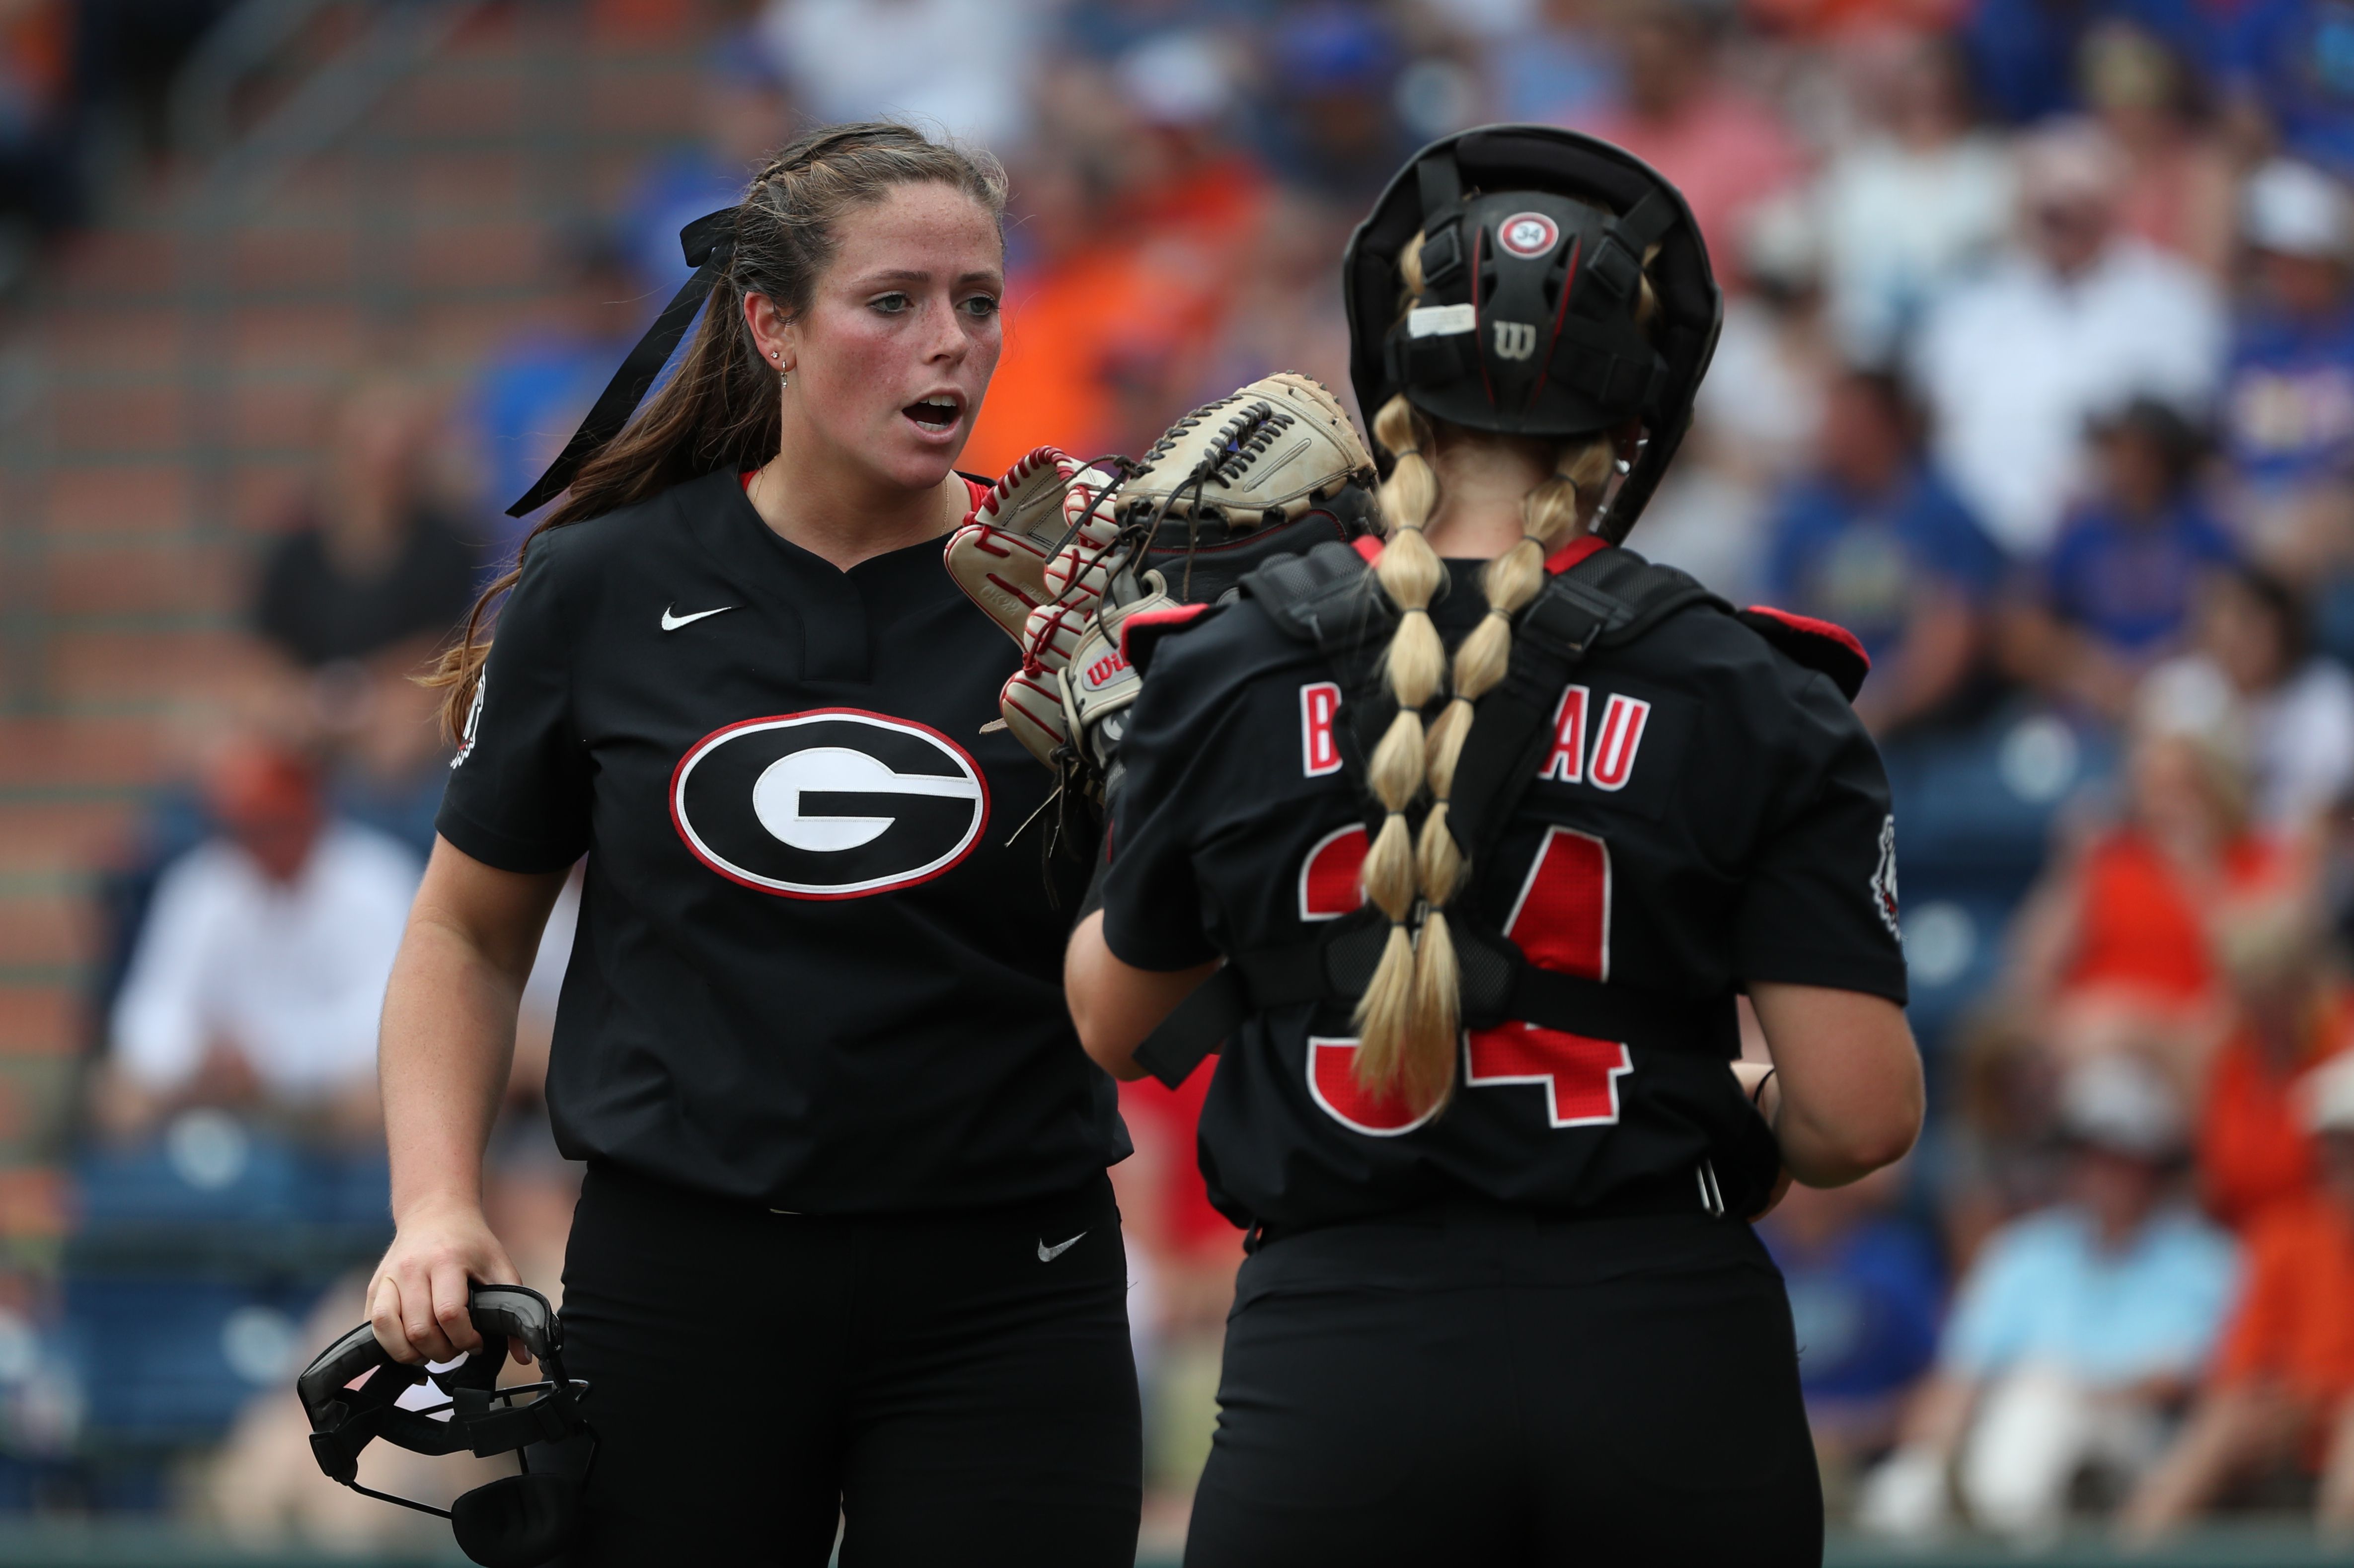 UGA softball plans to 'play with joy' as World Series underdogs